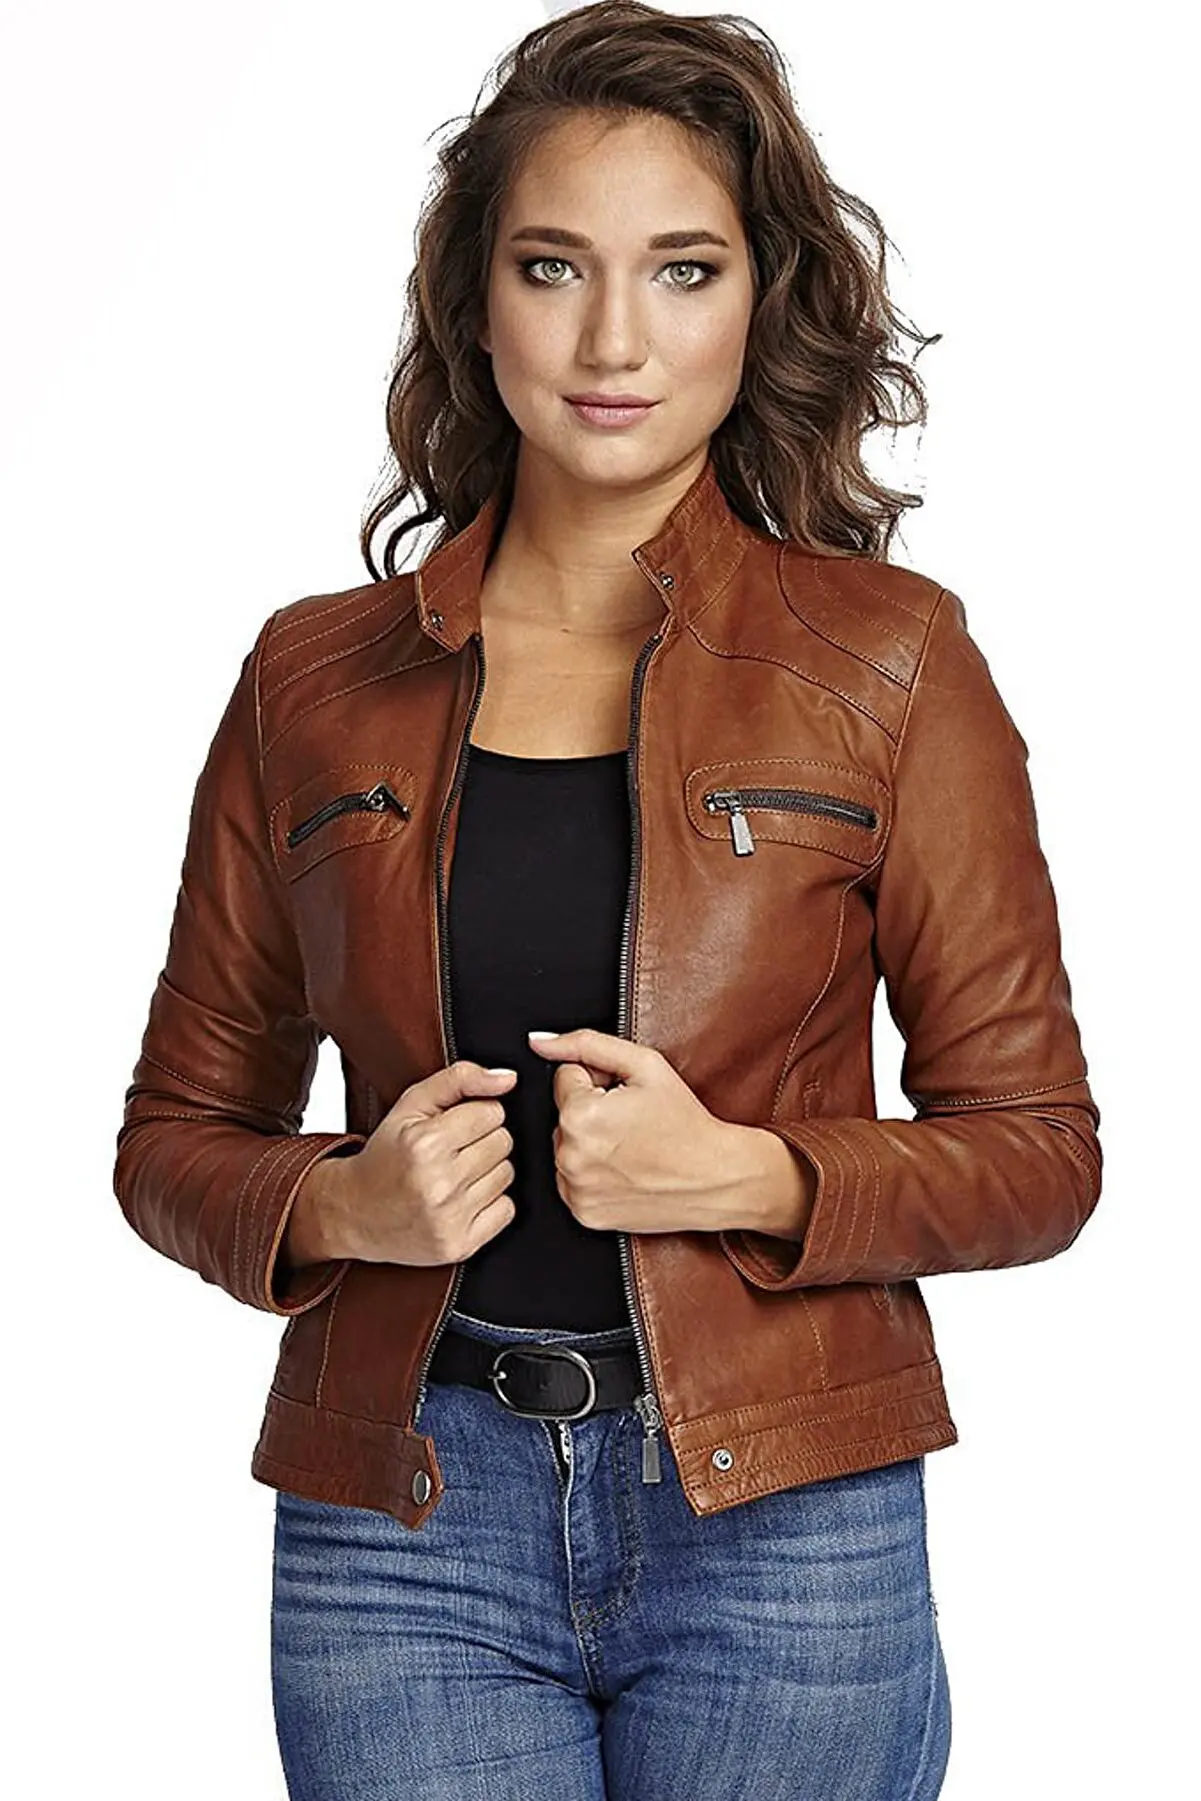 Genuine sheepskin Brown Slim Fit Biker jacket women's sports leather coat Spring and autumn fashion products waterproof